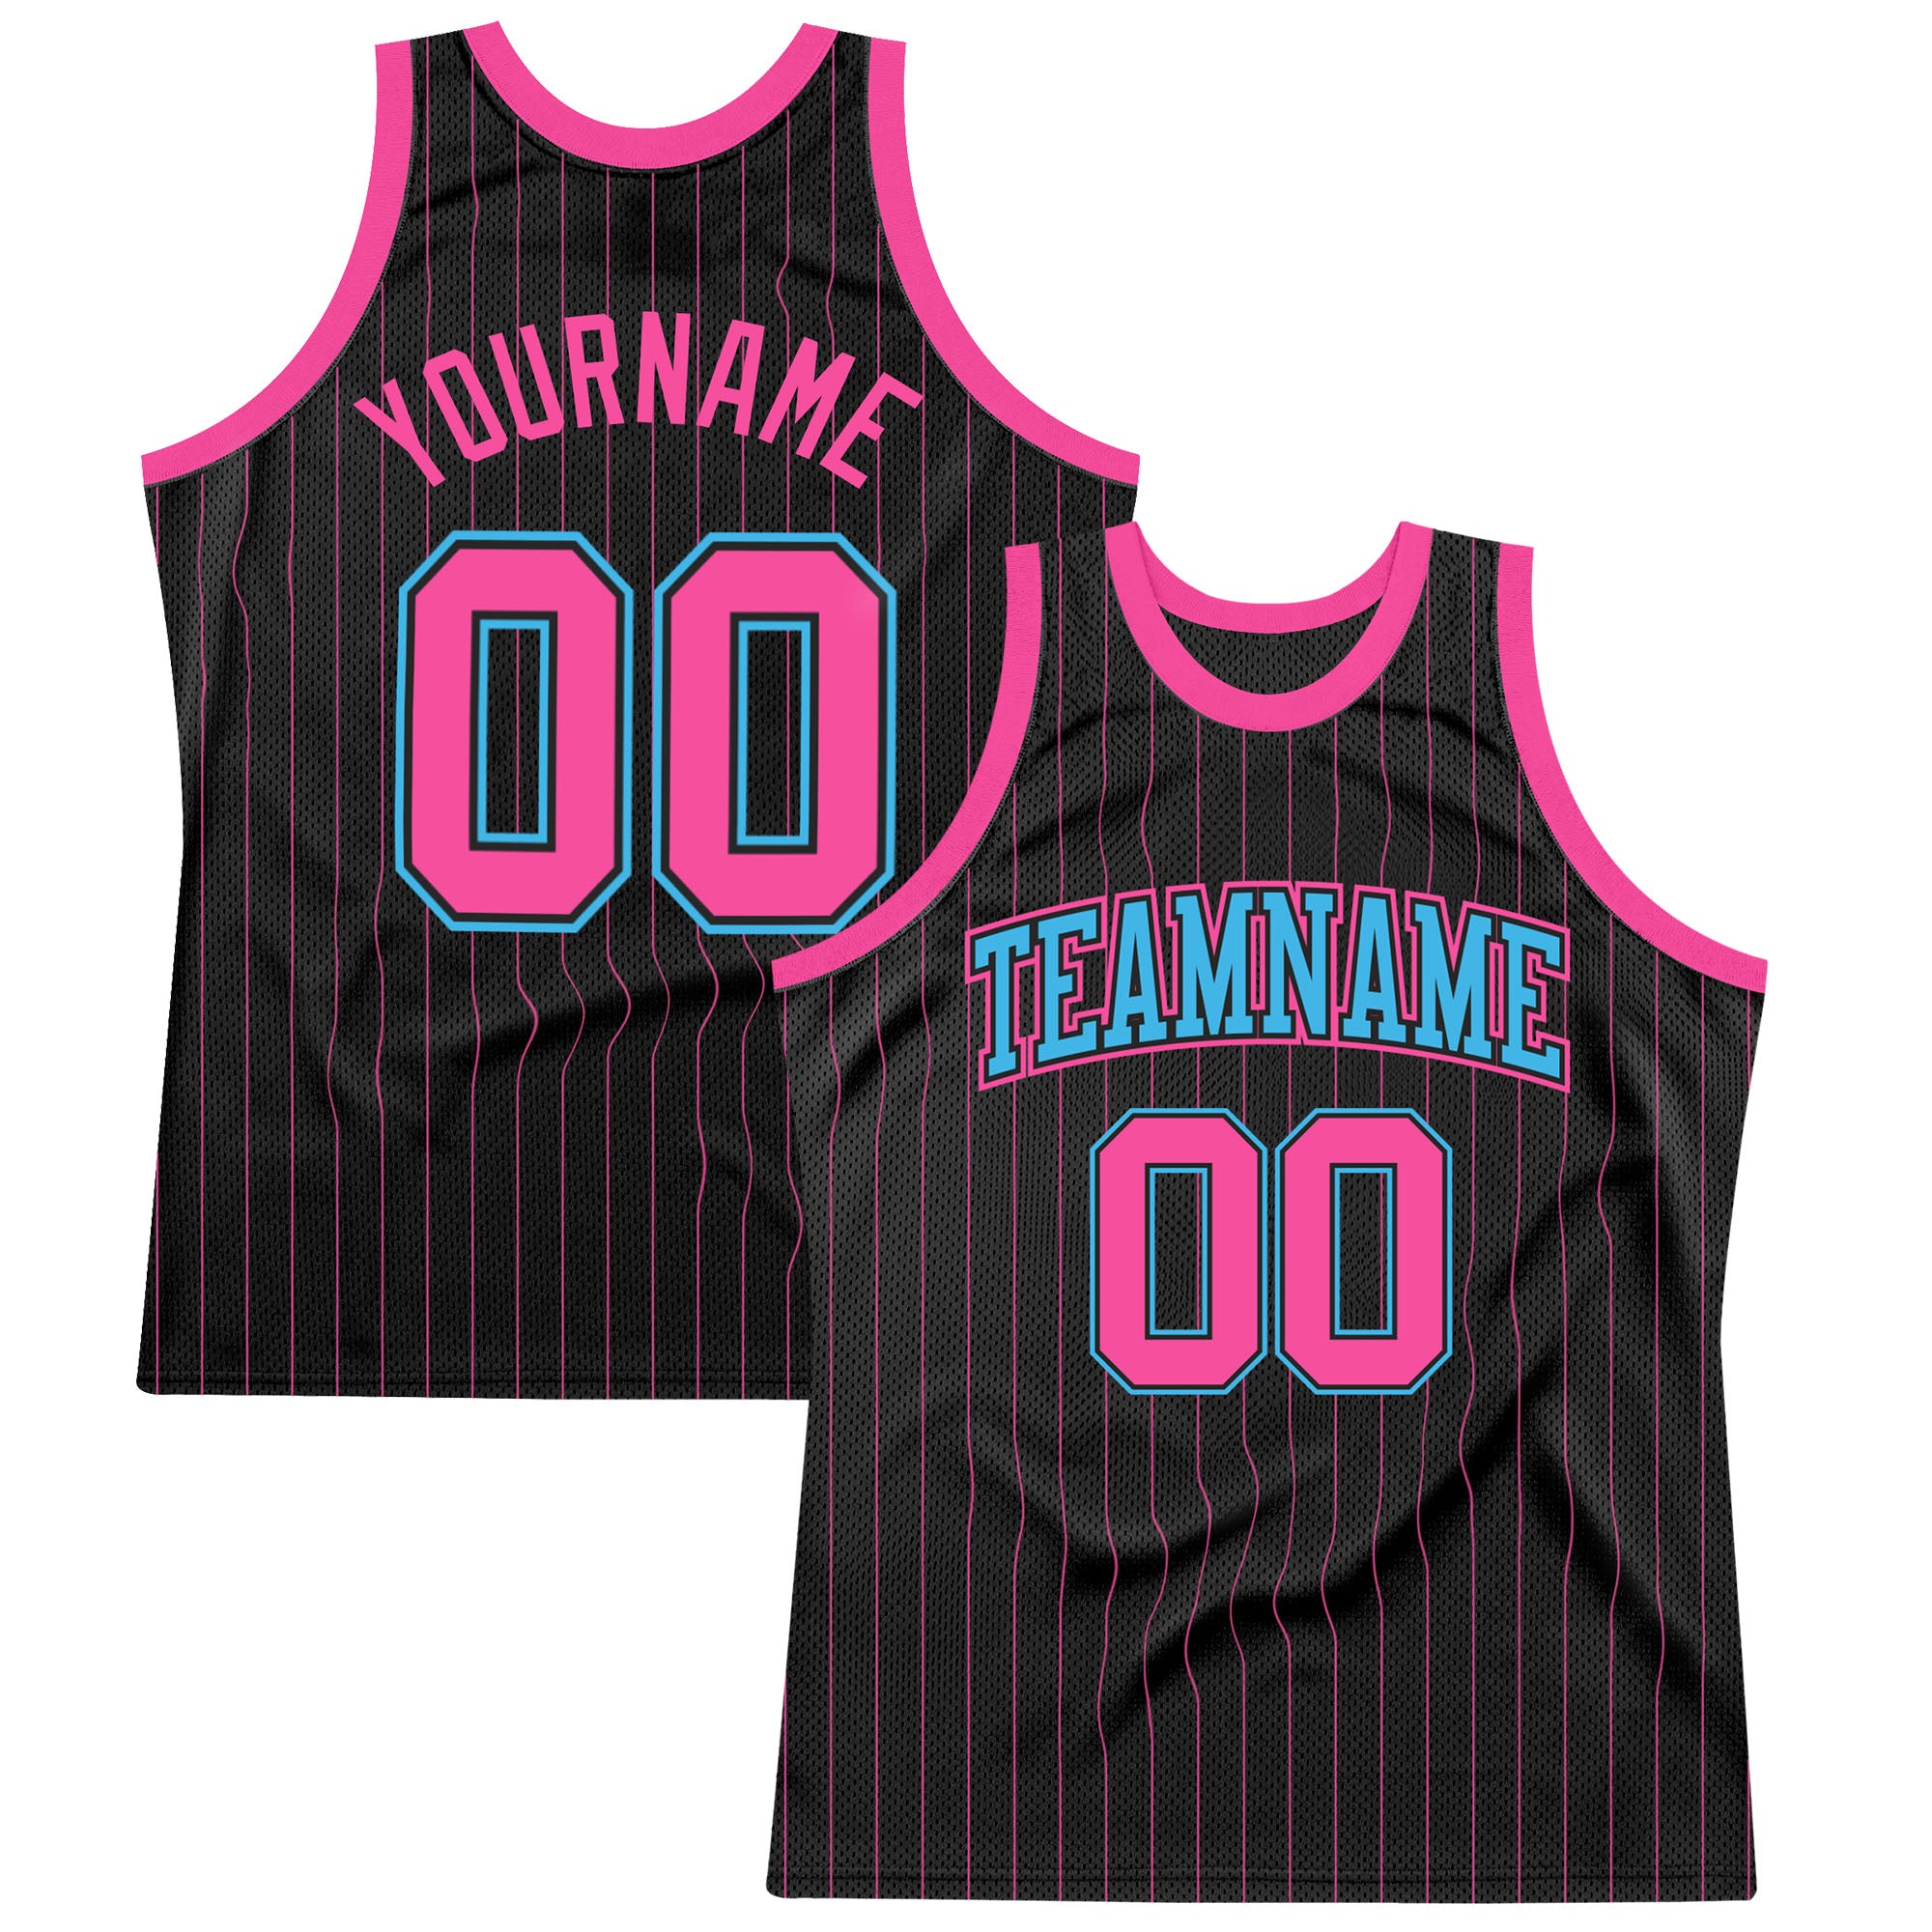  PENNY73 Blue Flame Men's Basketball Jersey Training